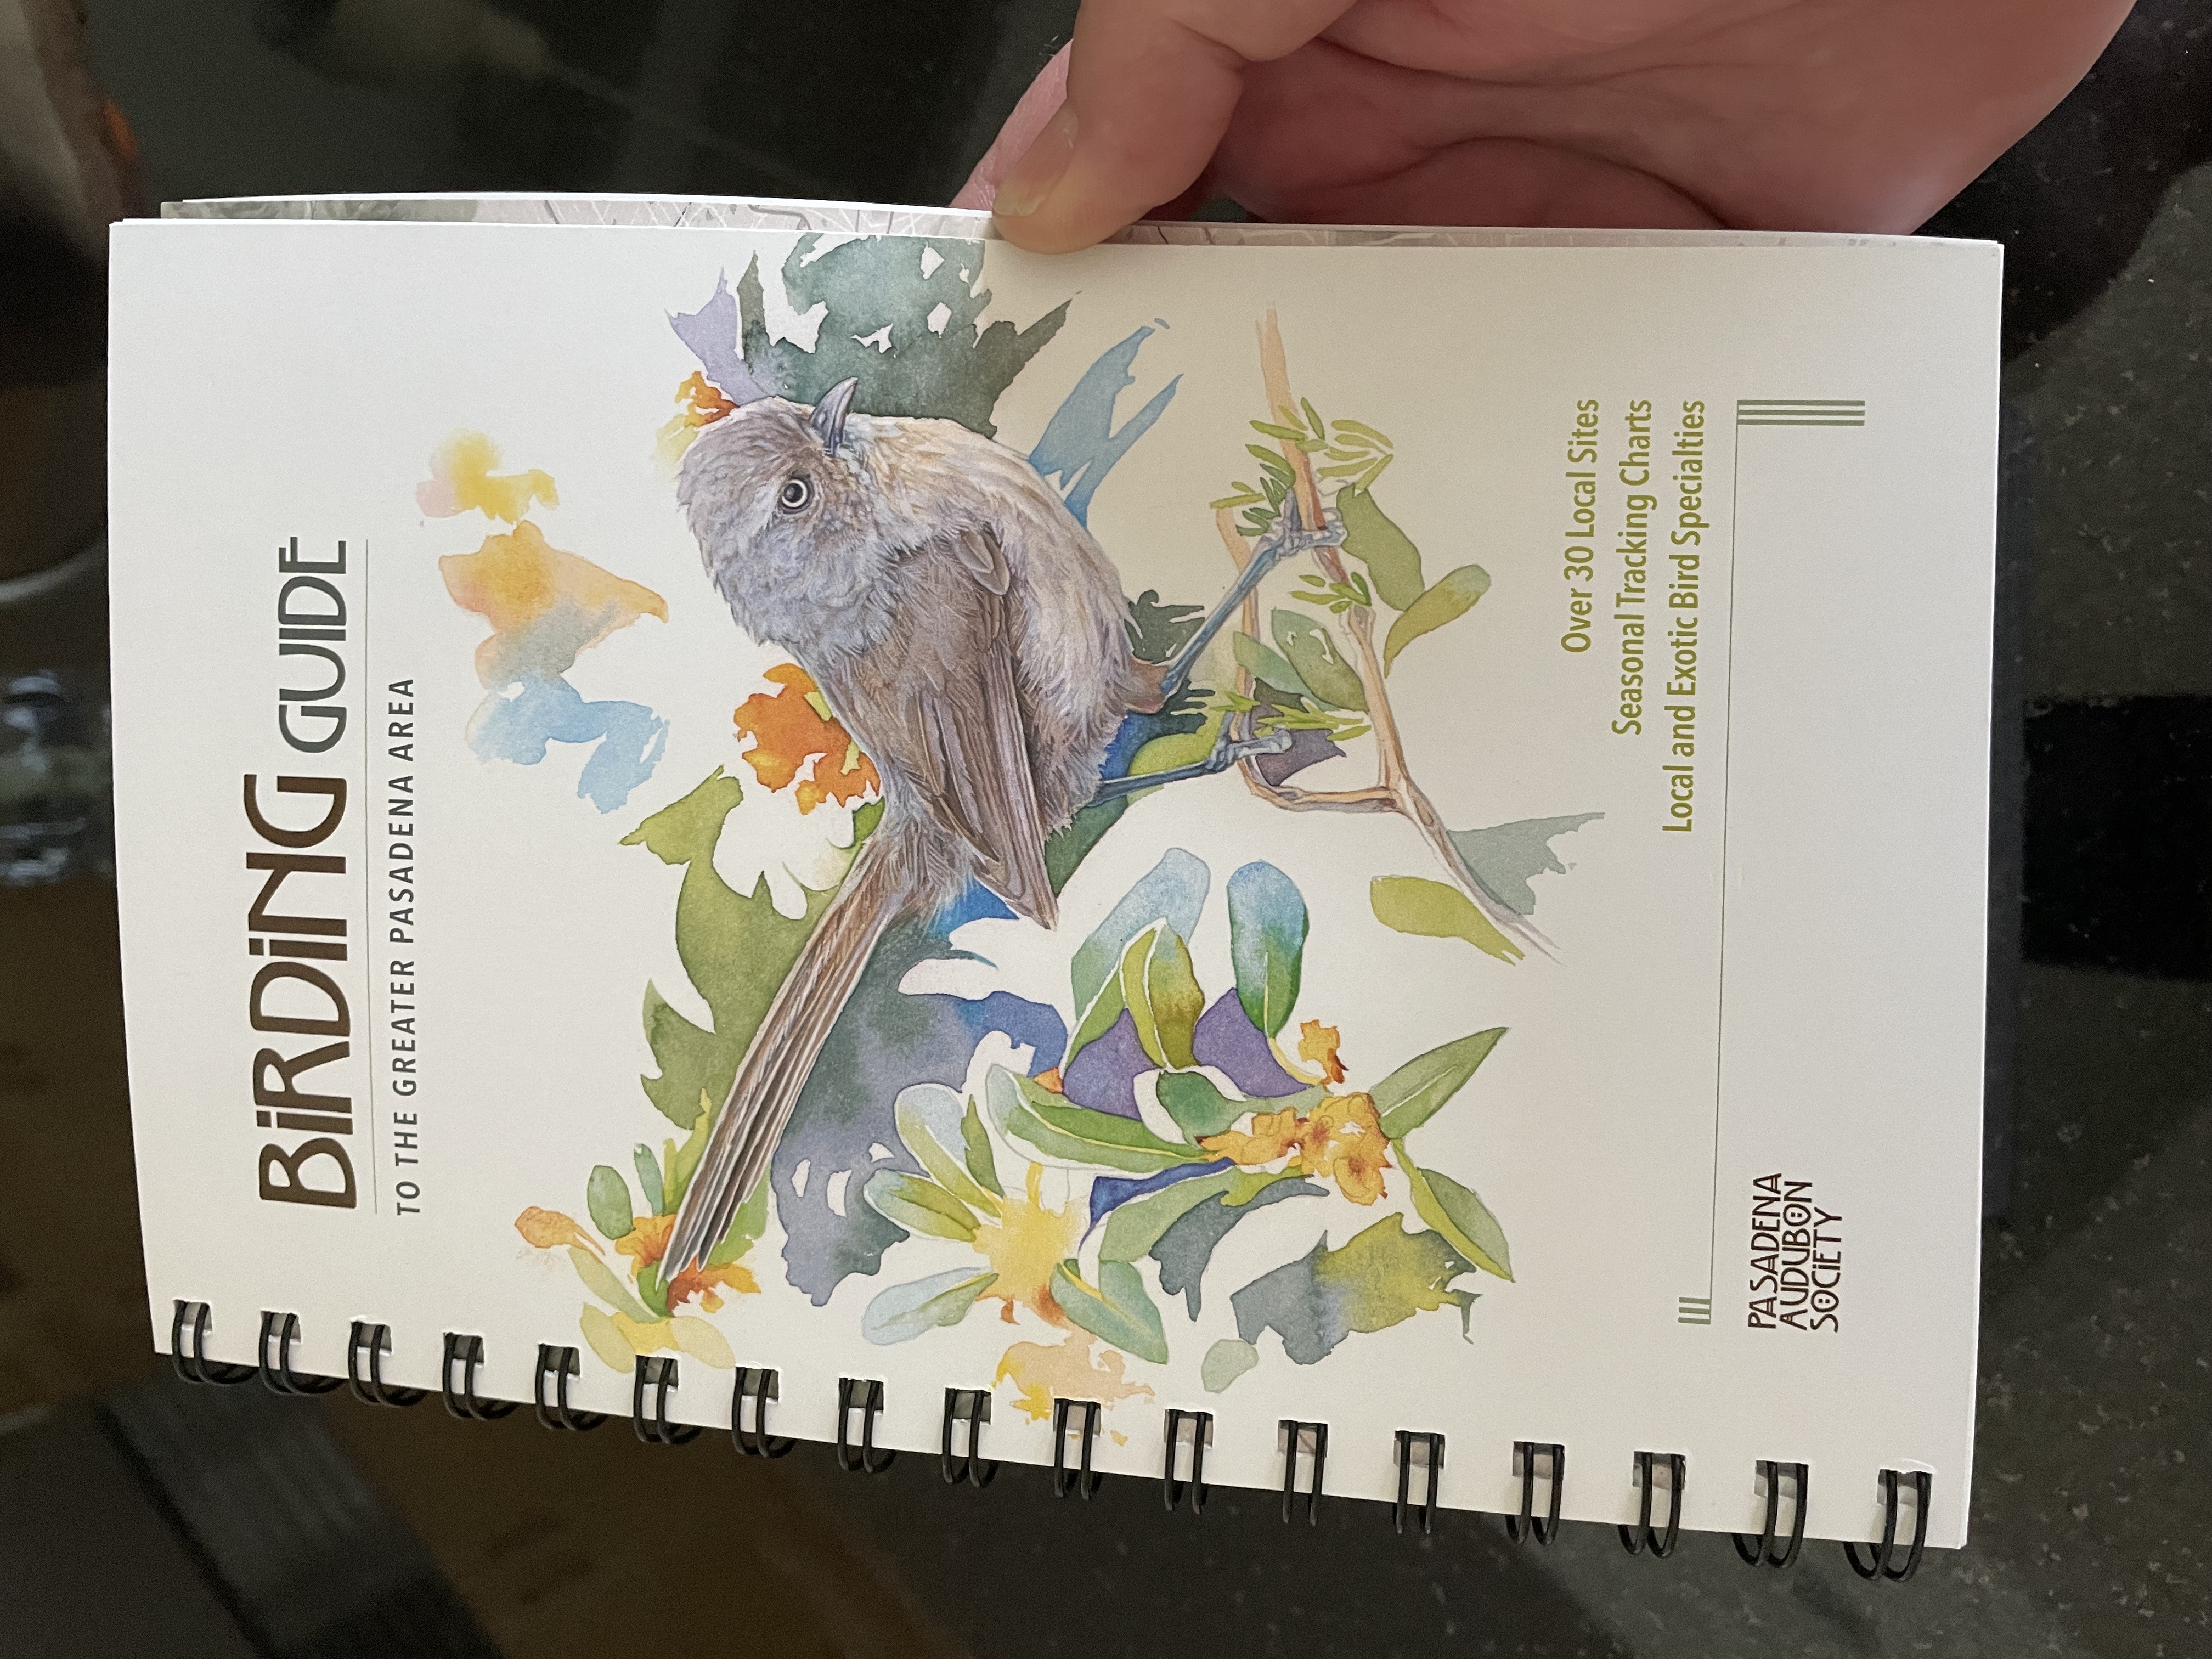 Photo of the new Birding Guide